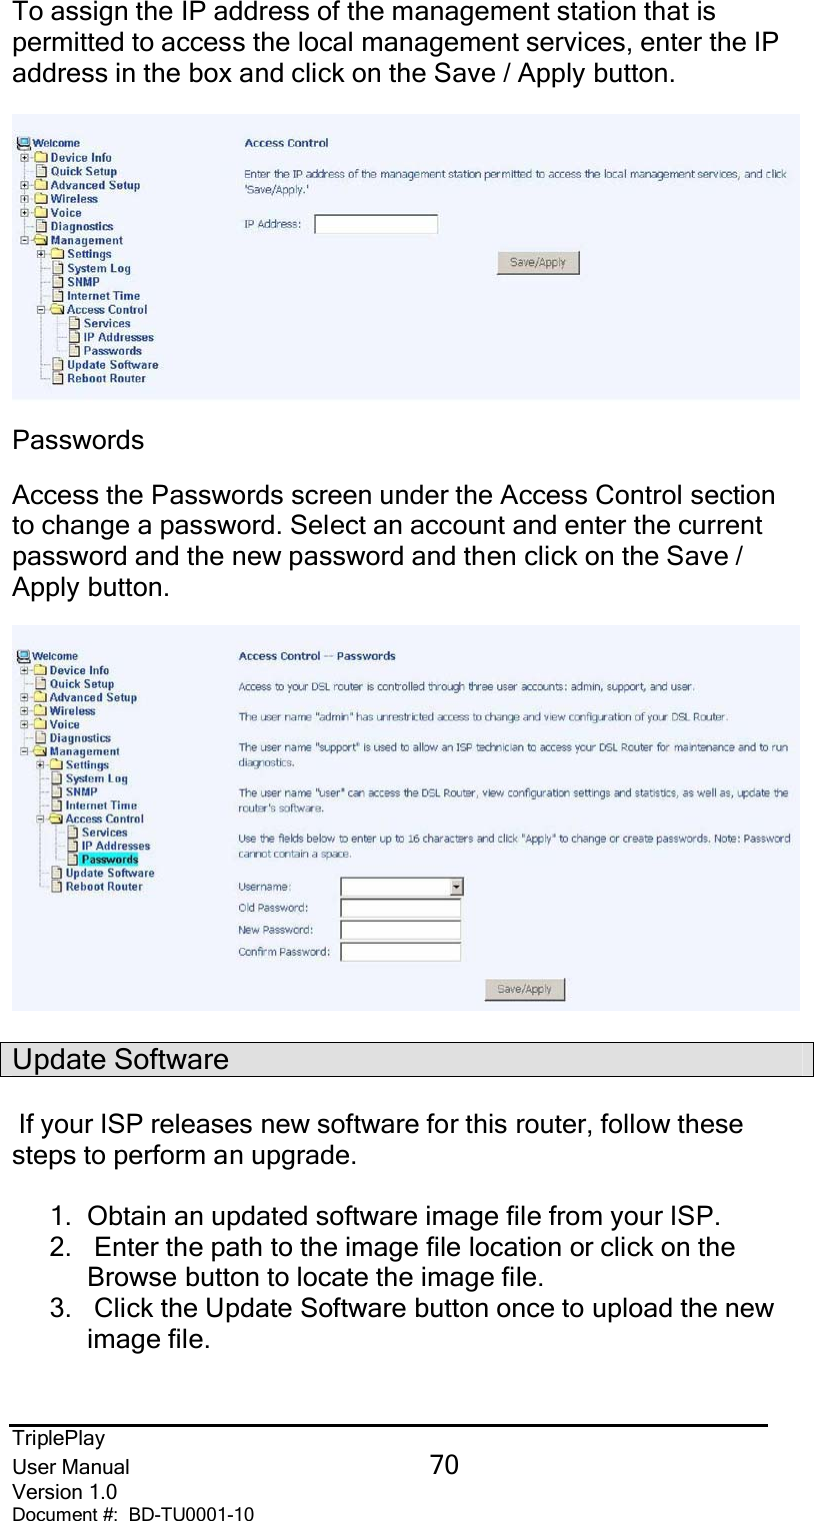 TriplePlayUser Manual 70Version 1.0Document #:  BD-TU0001-10To assign the IP address of the management station that ispermitted to access the local management services, enter the IPaddress in the box and click on the Save / Apply button.PasswordsAccess the Passwords screen under the Access Control sectionto change a password. Select an account and enter the currentpassword and the new password and then click on the Save /Apply button.Update SoftwareIf your ISP releases new software for this router, follow thesesteps to perform an upgrade.1. Obtain an updated software image file from your ISP.2.   Enter the path to the image file location or click on theBrowse button to locate the image file.3.   Click the Update Software button once to upload the newimage file.